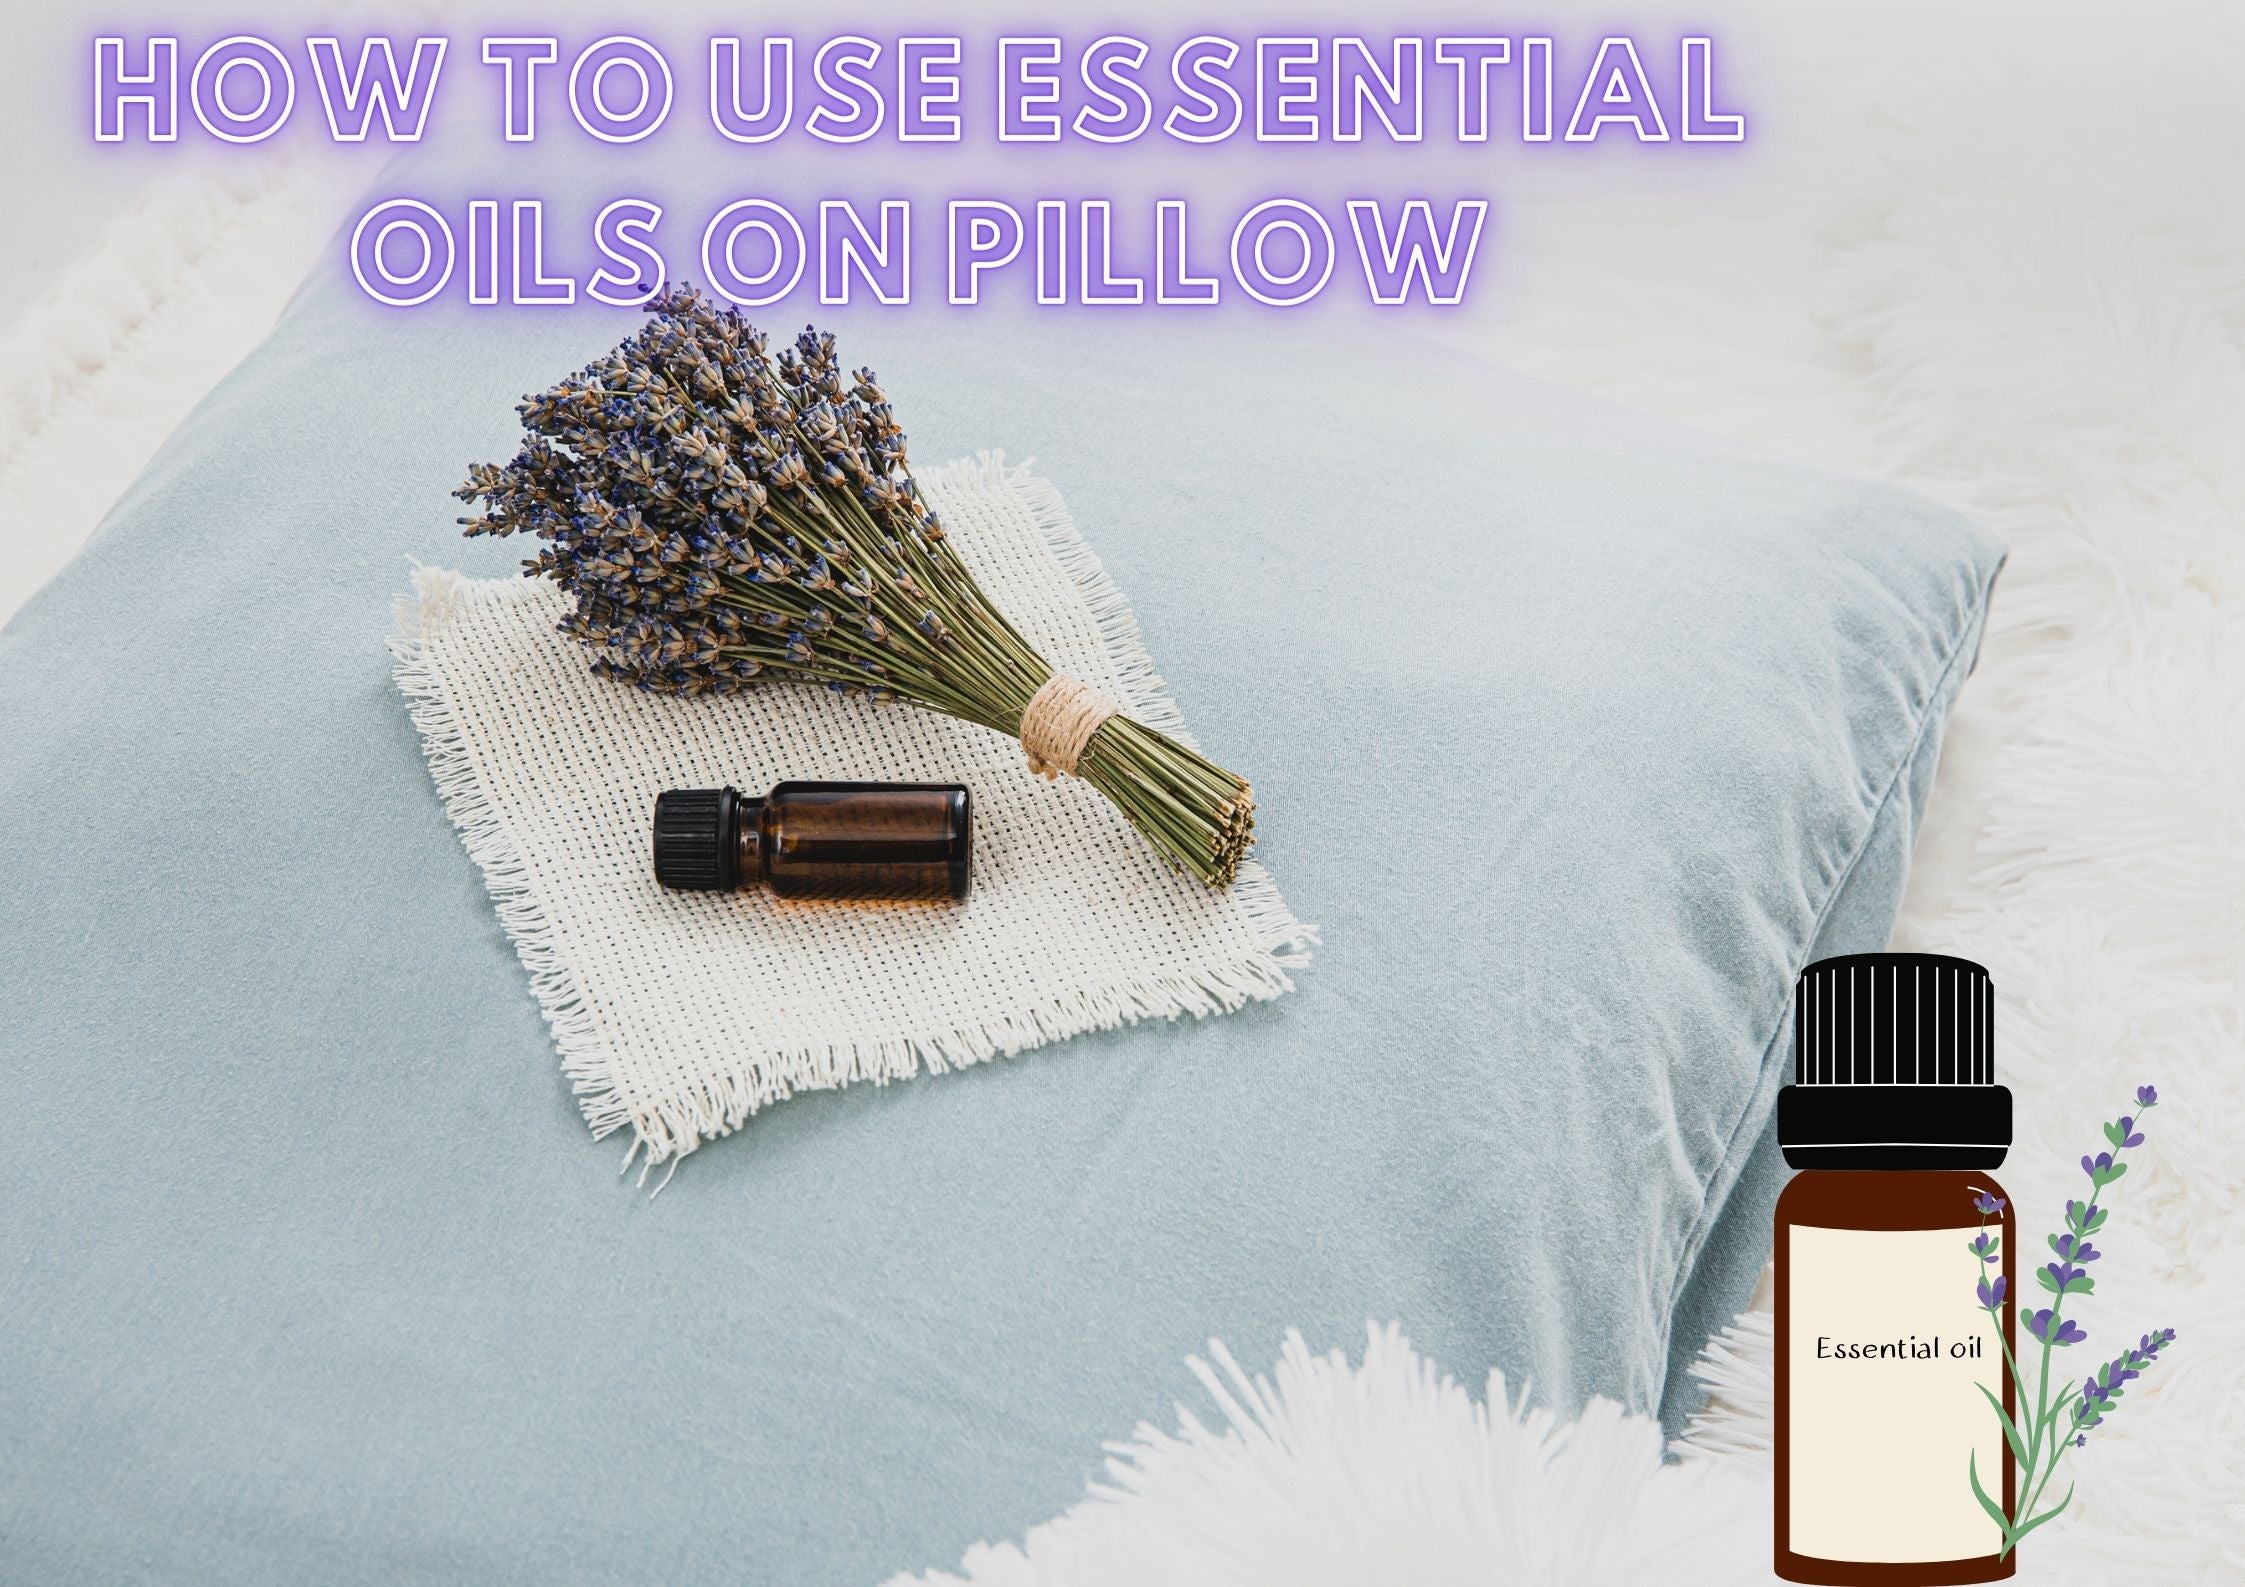 How to use essential oils on pillow